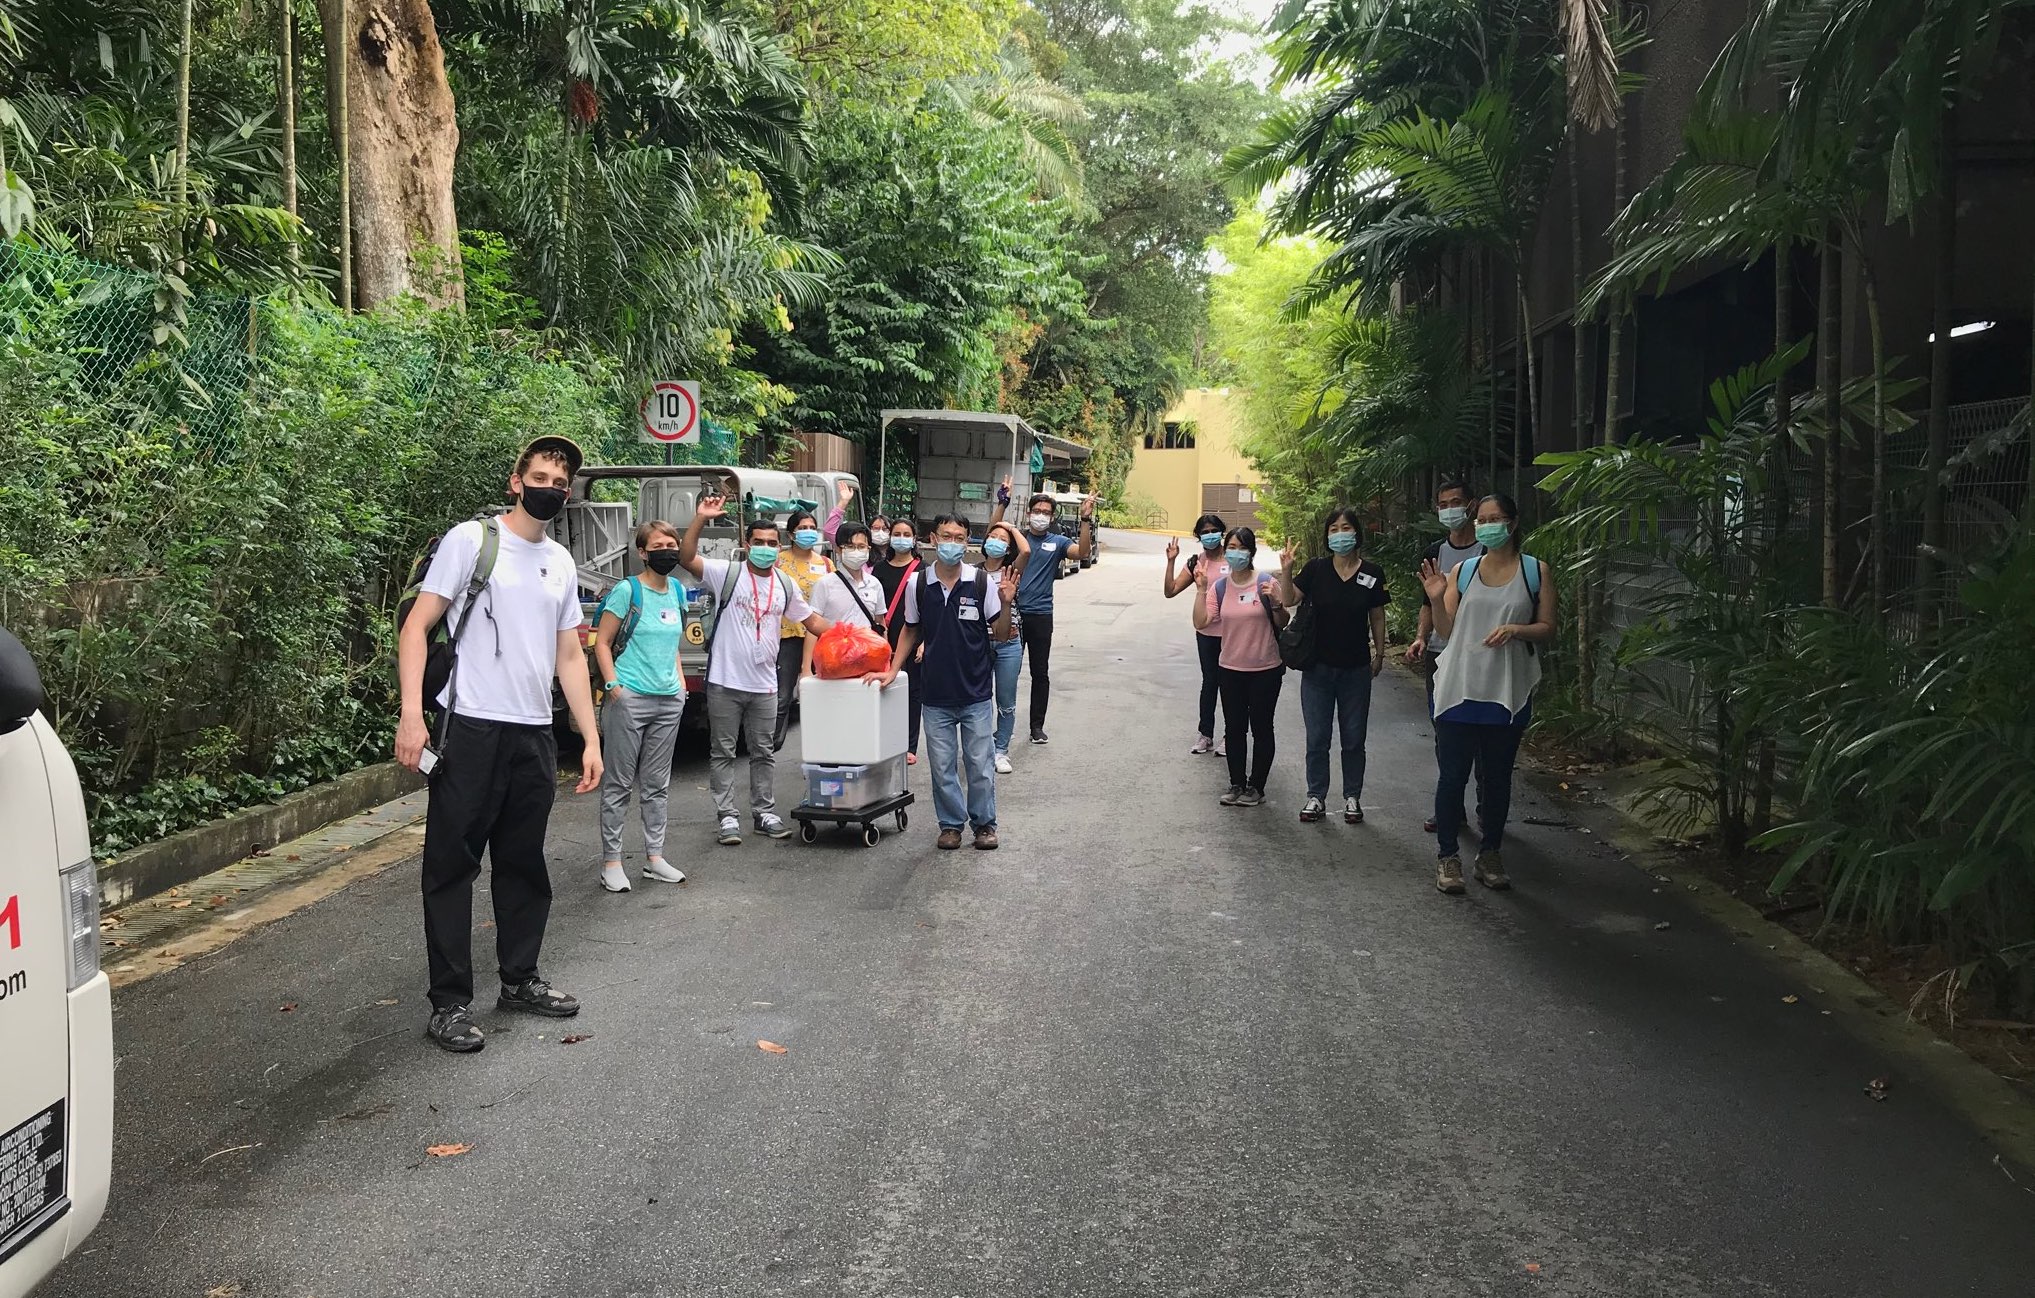 SCELSE air microbiome team gathers on a forested road at an outdoor sampling site with sampling equipment on trolly's. Team members each wear face masks for covering during COVID-19 Singapore re-opening